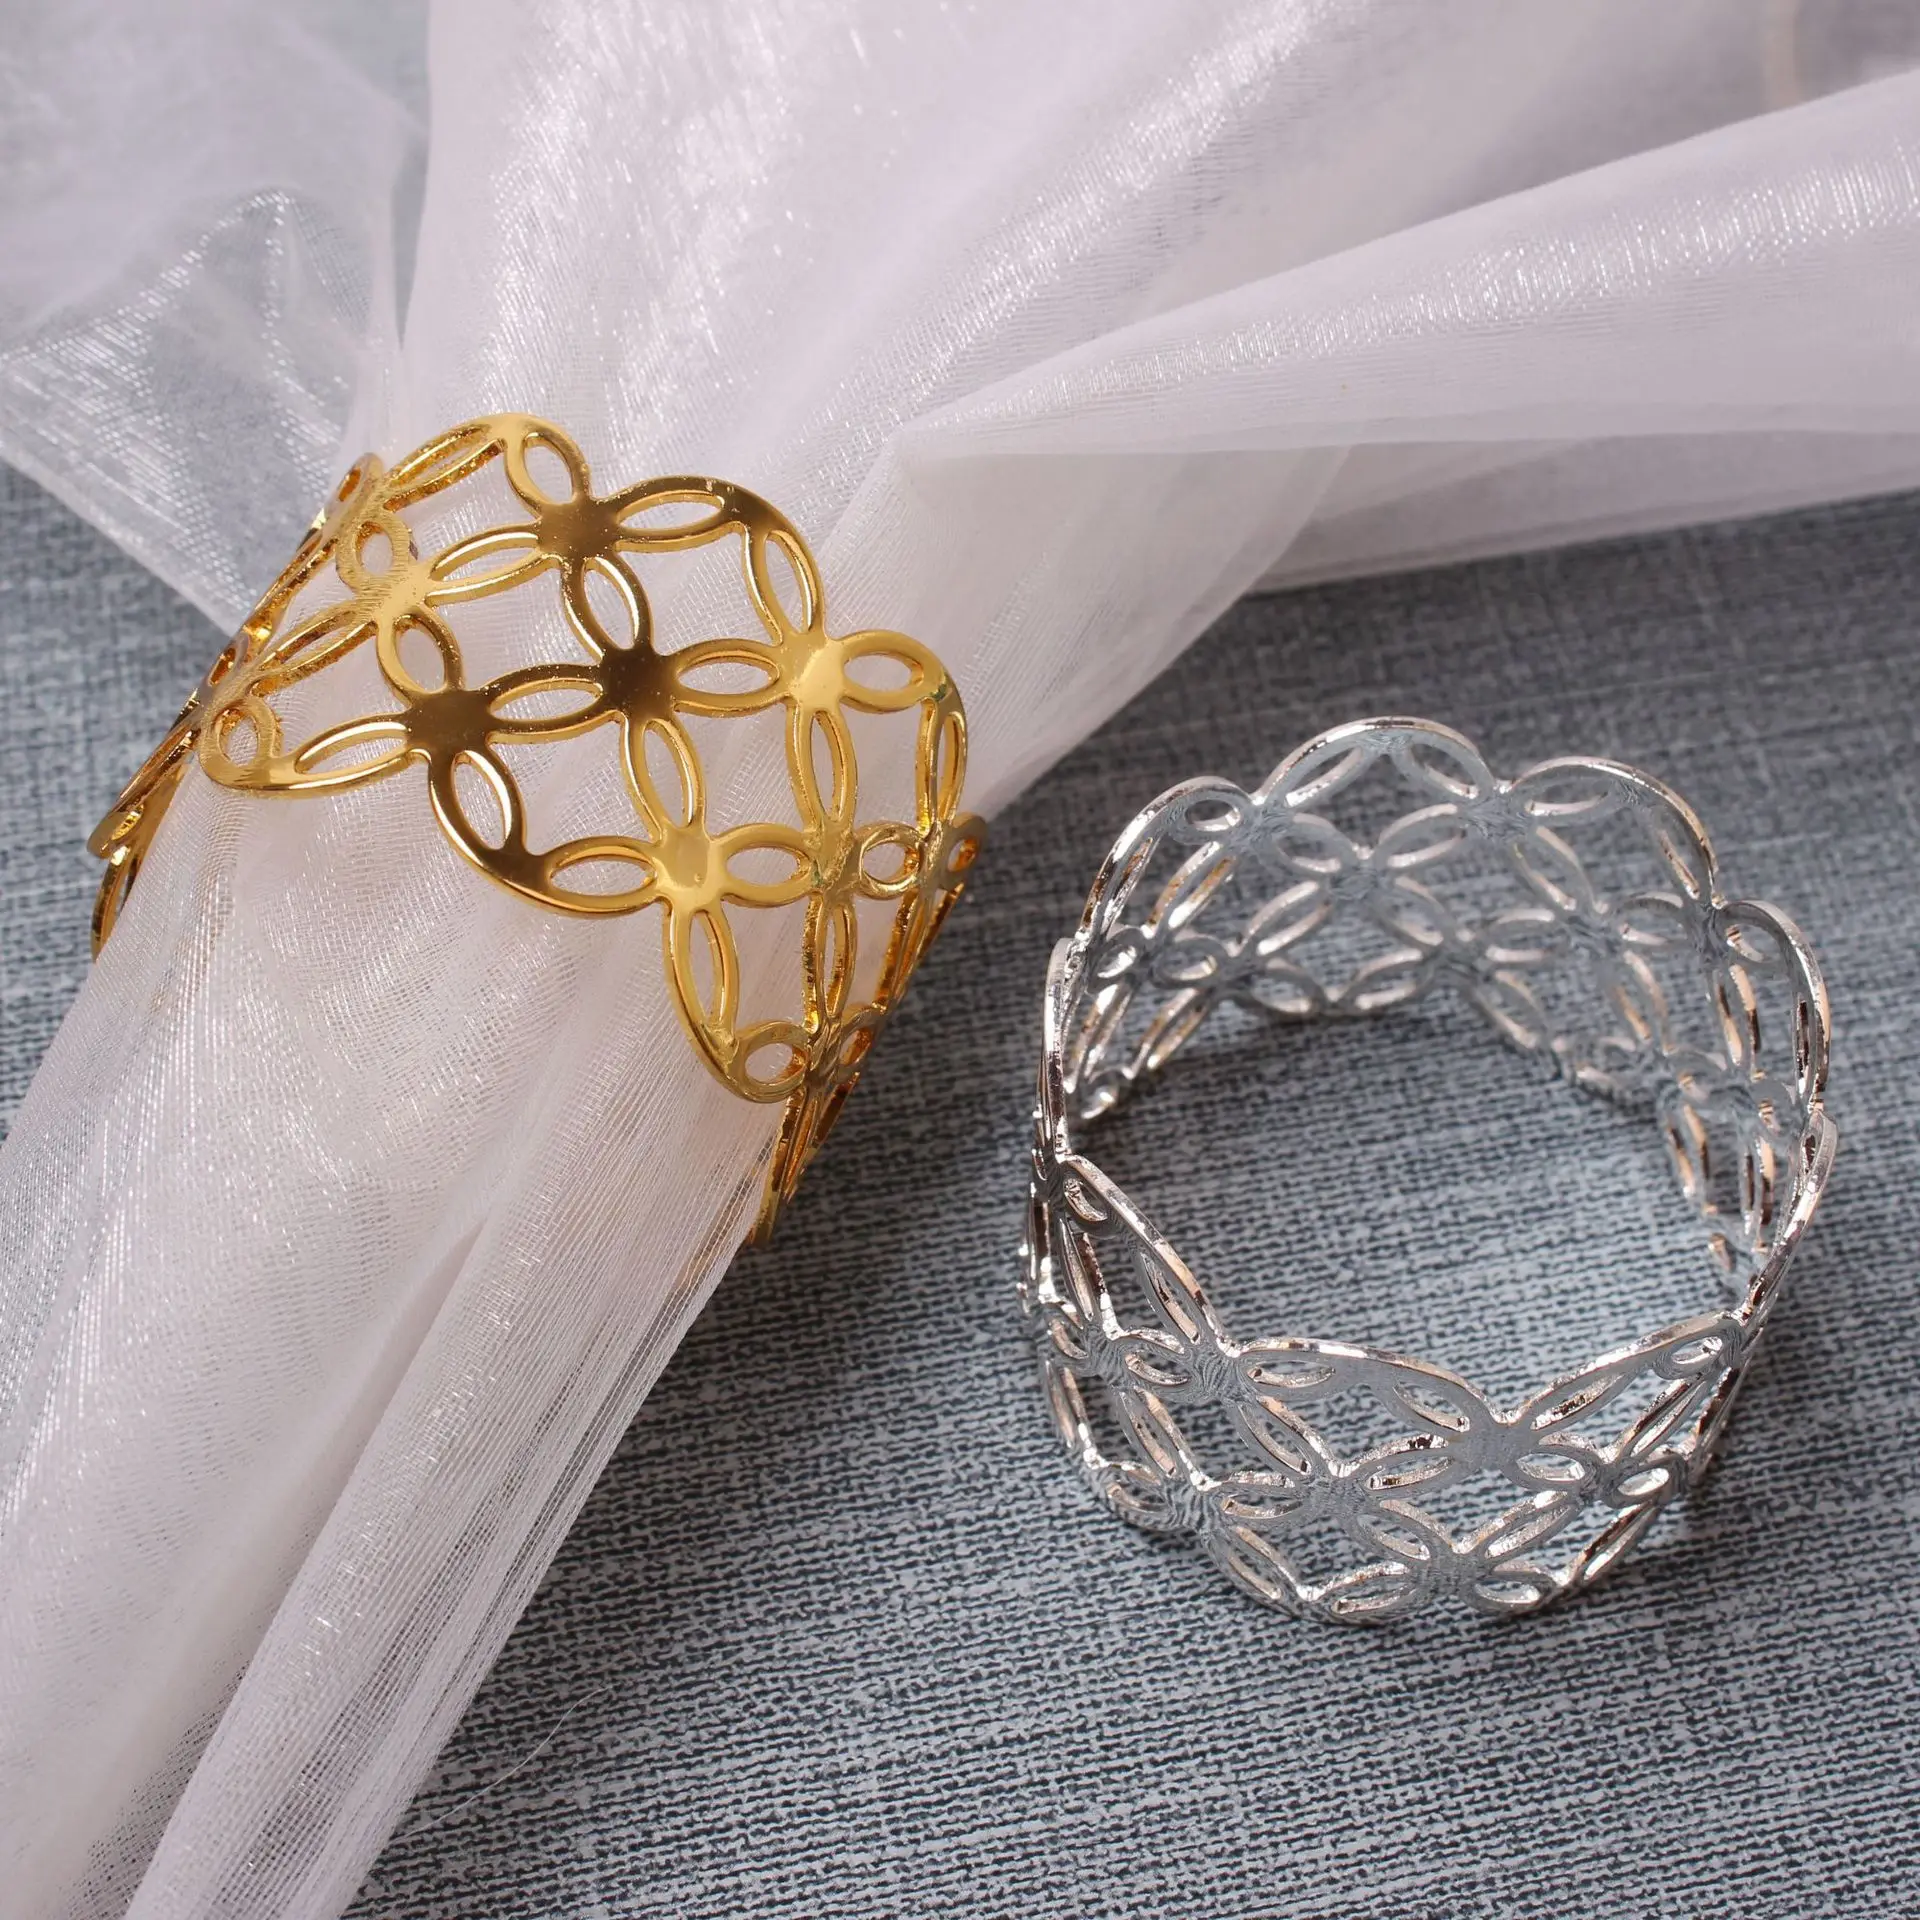 

Napkin Rings Holder Metal Hollow Petal Buckle Novelties Becket For Hotel Banquet Wedding Party Event Dining Table Decoration